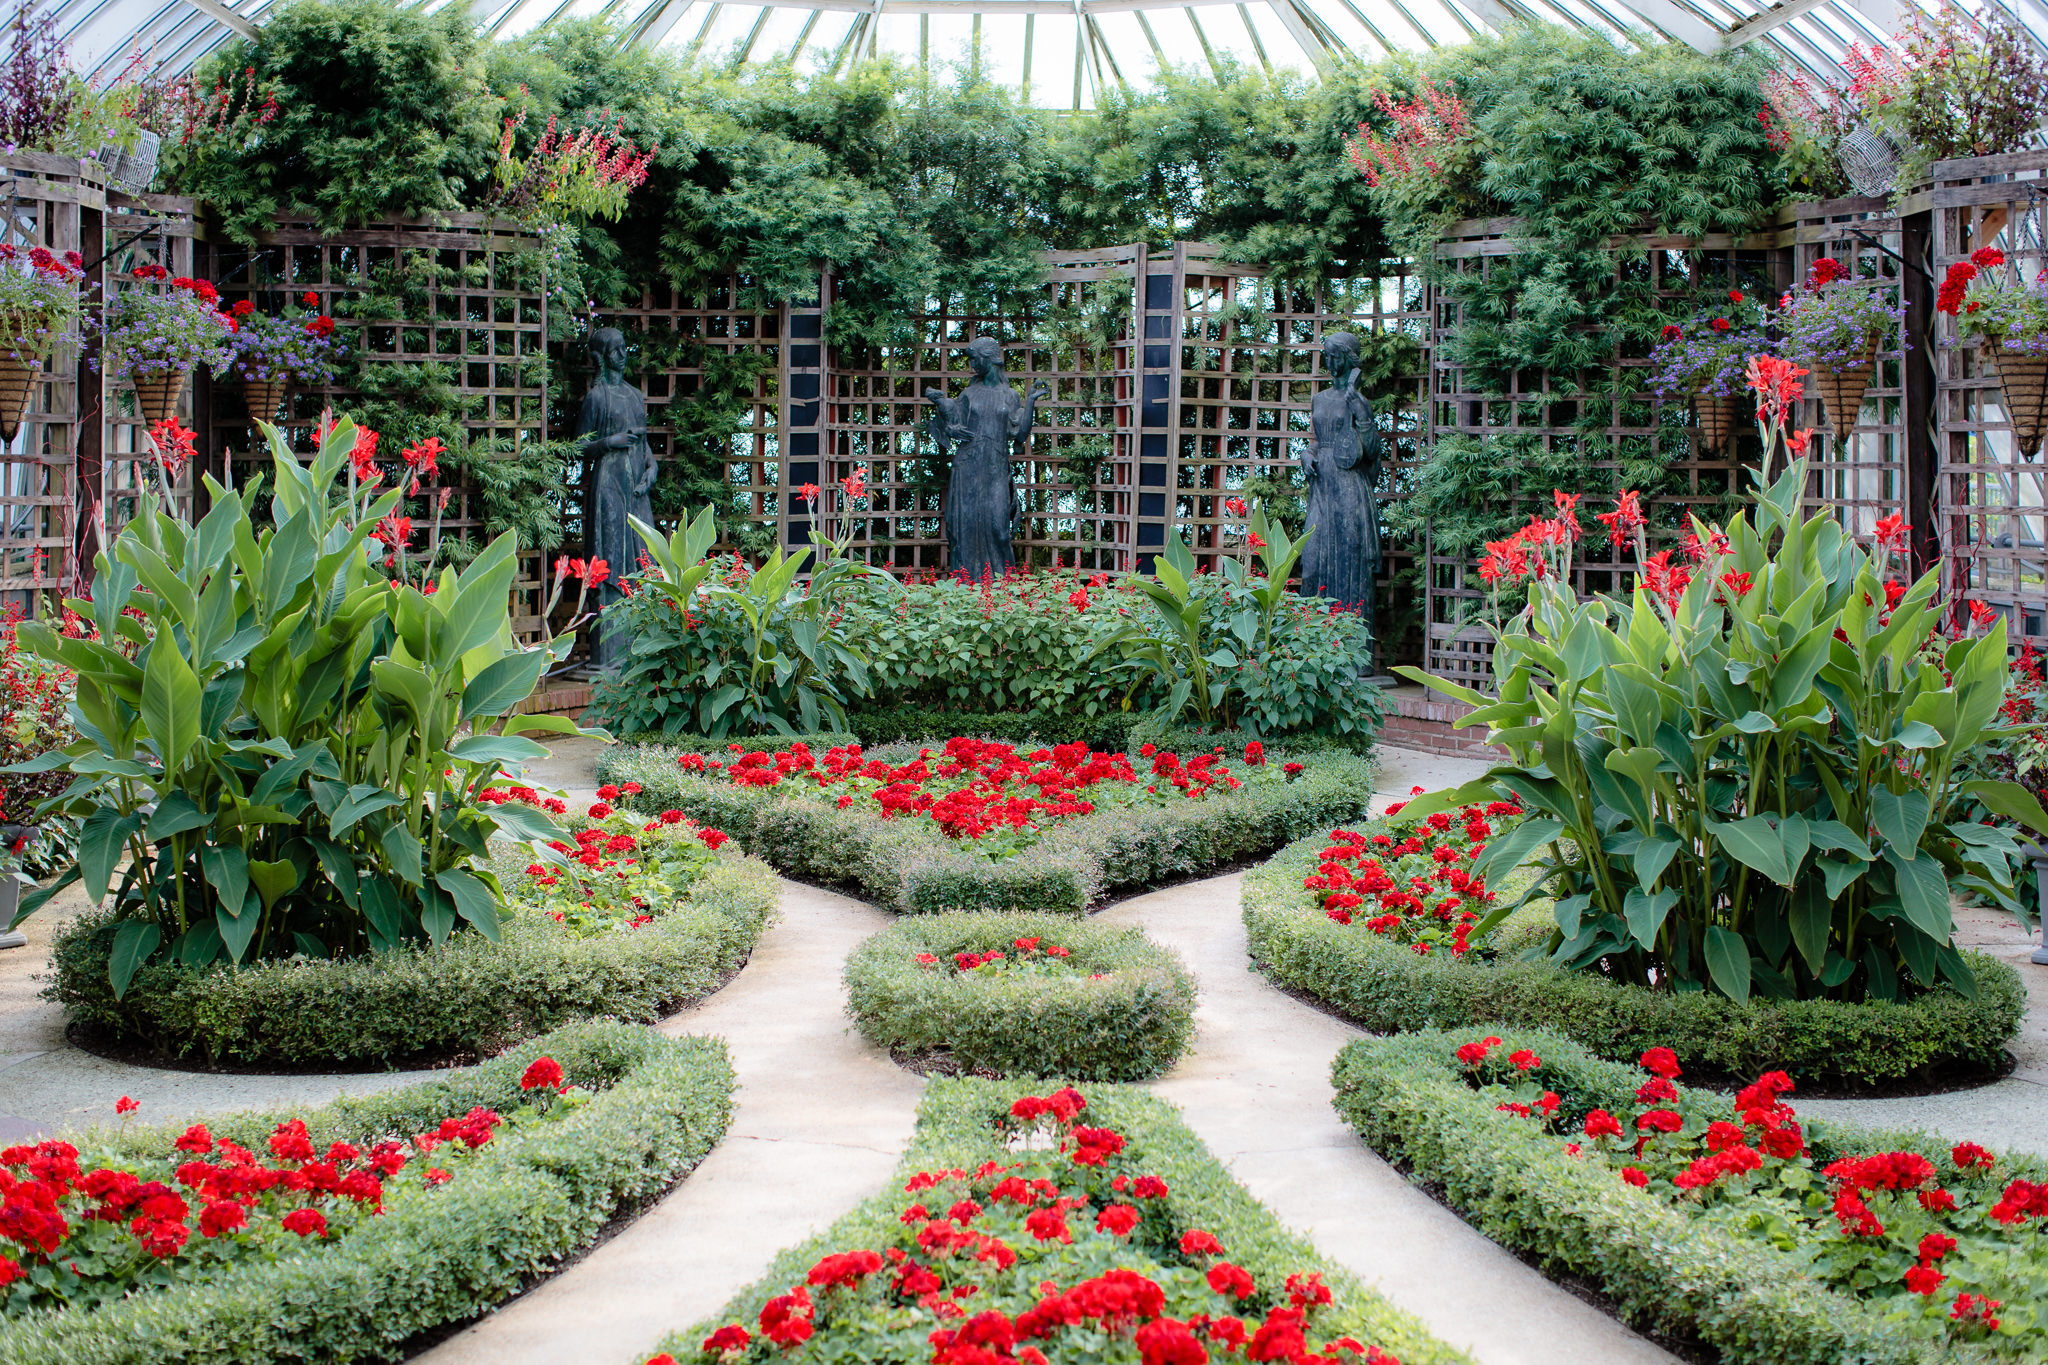 The Broderie Room inside Phipps Conservatory in Pittsburgh is full of red flowers & lush greenery